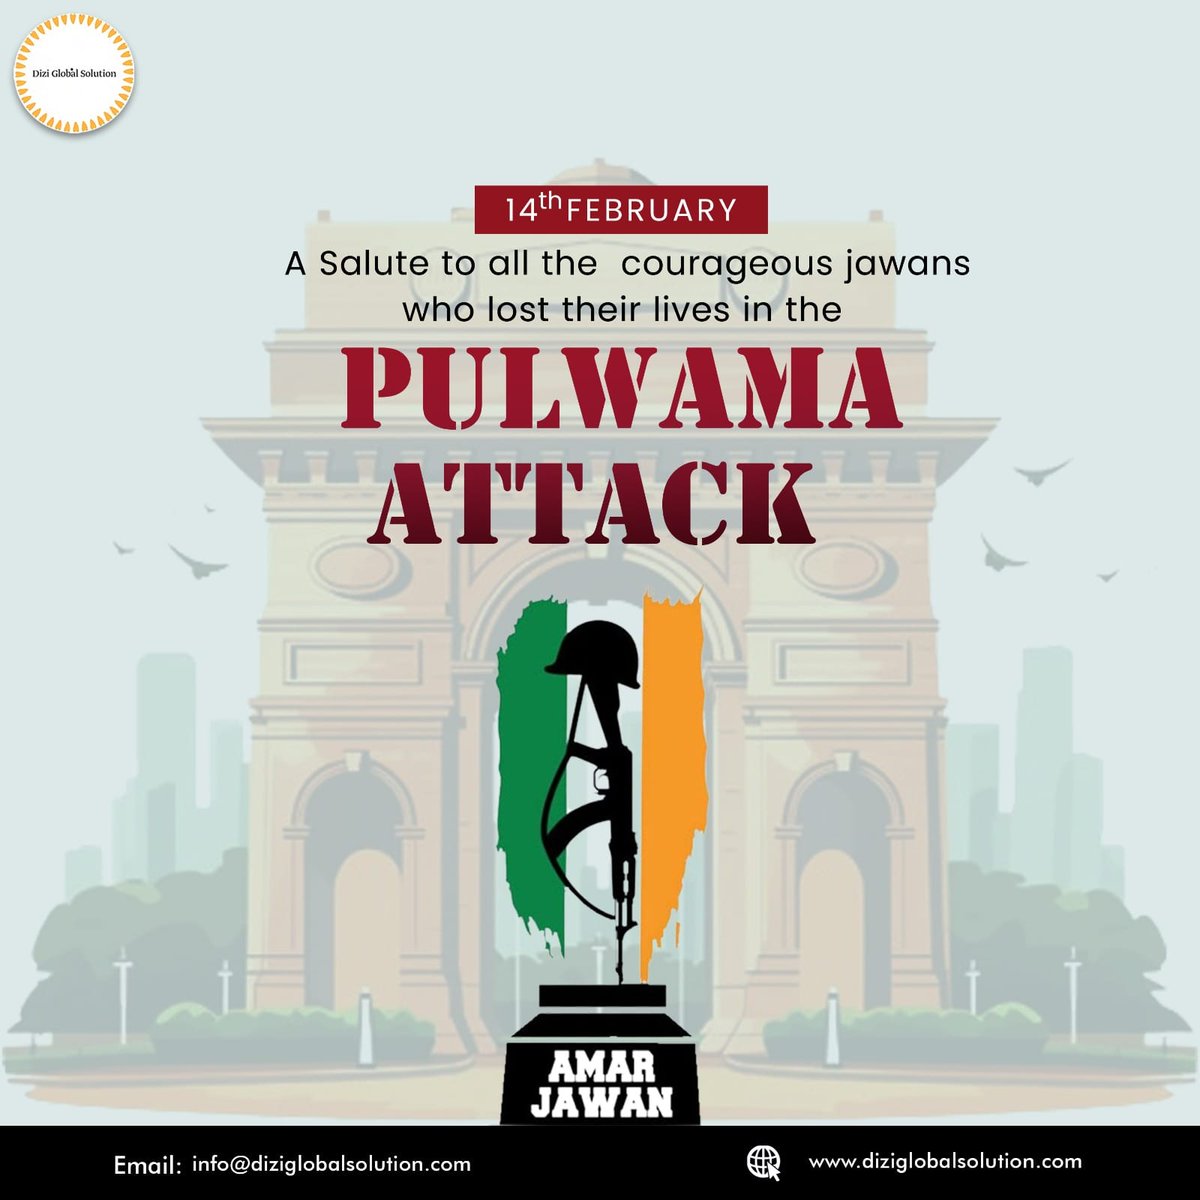 📷 Today, we stand together in solemn remembrance of the lives lost in the tragic Pulwama attack. Let's honor their memory by promoting peace, unity, and solidarity!
.
#PulwamaAttack #NeverForget #RememberingPulwama #PeaceNotViolence #UnityAgainstTerrorism #SolidarityForPulwama